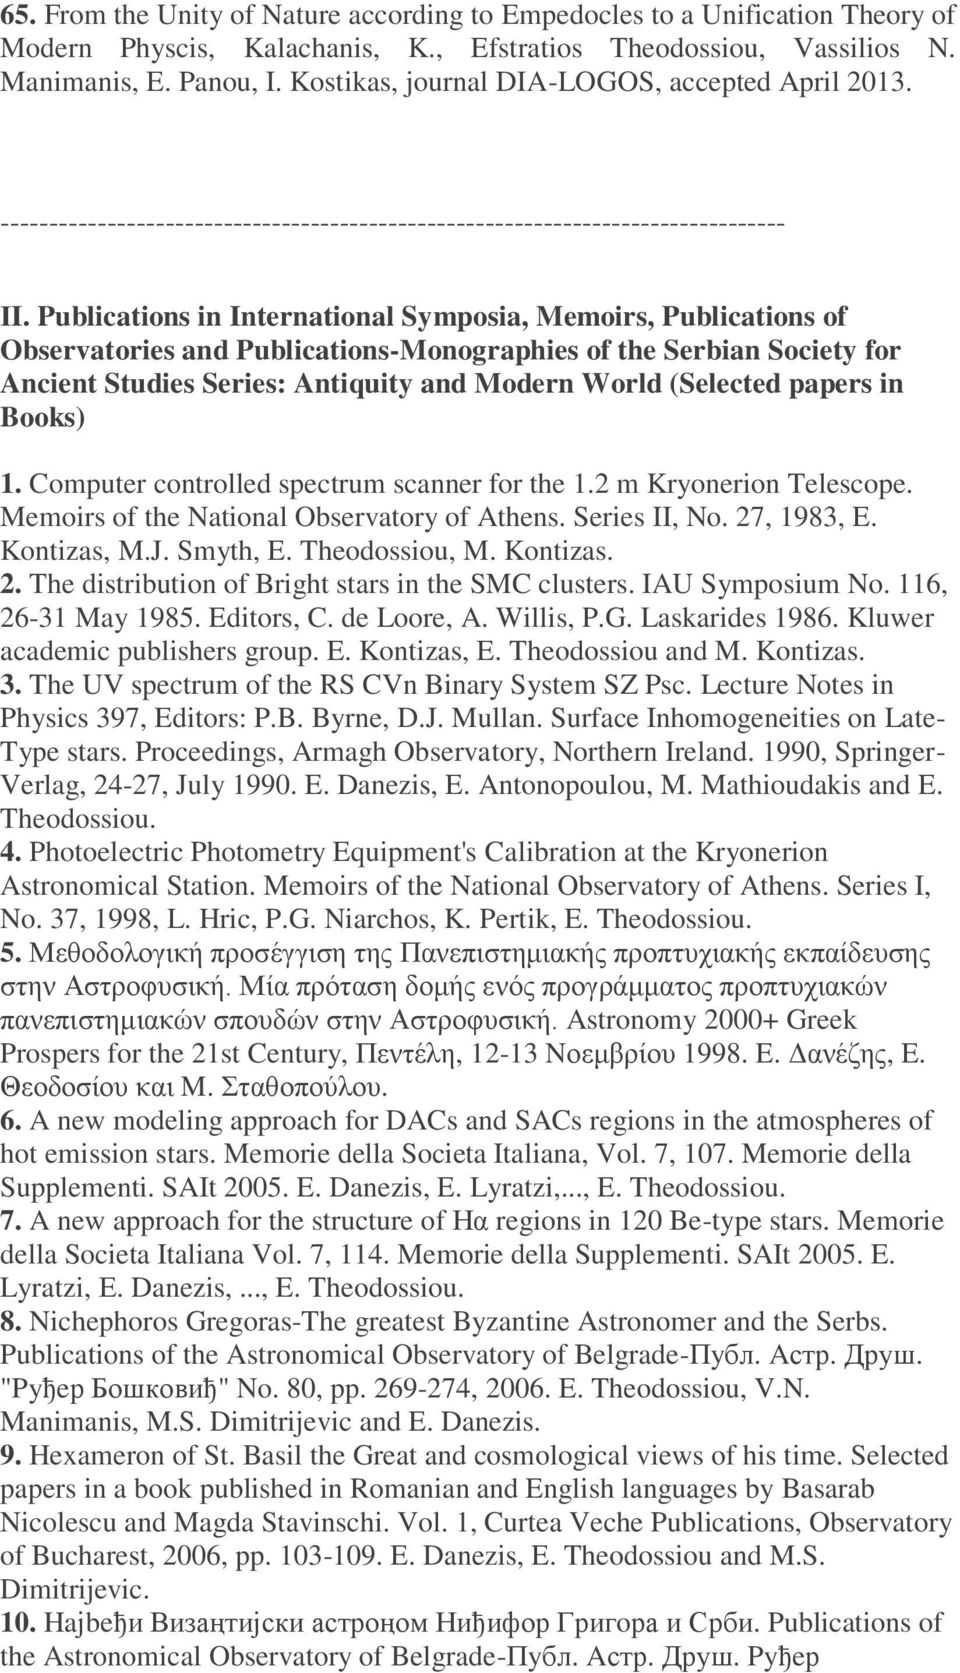 Publications in International Symposia, Memoirs, Publications of Observatories and Publications-Monographies of the Serbian Society for Ancient Studies Series: Antiquity and Modern World (Selected